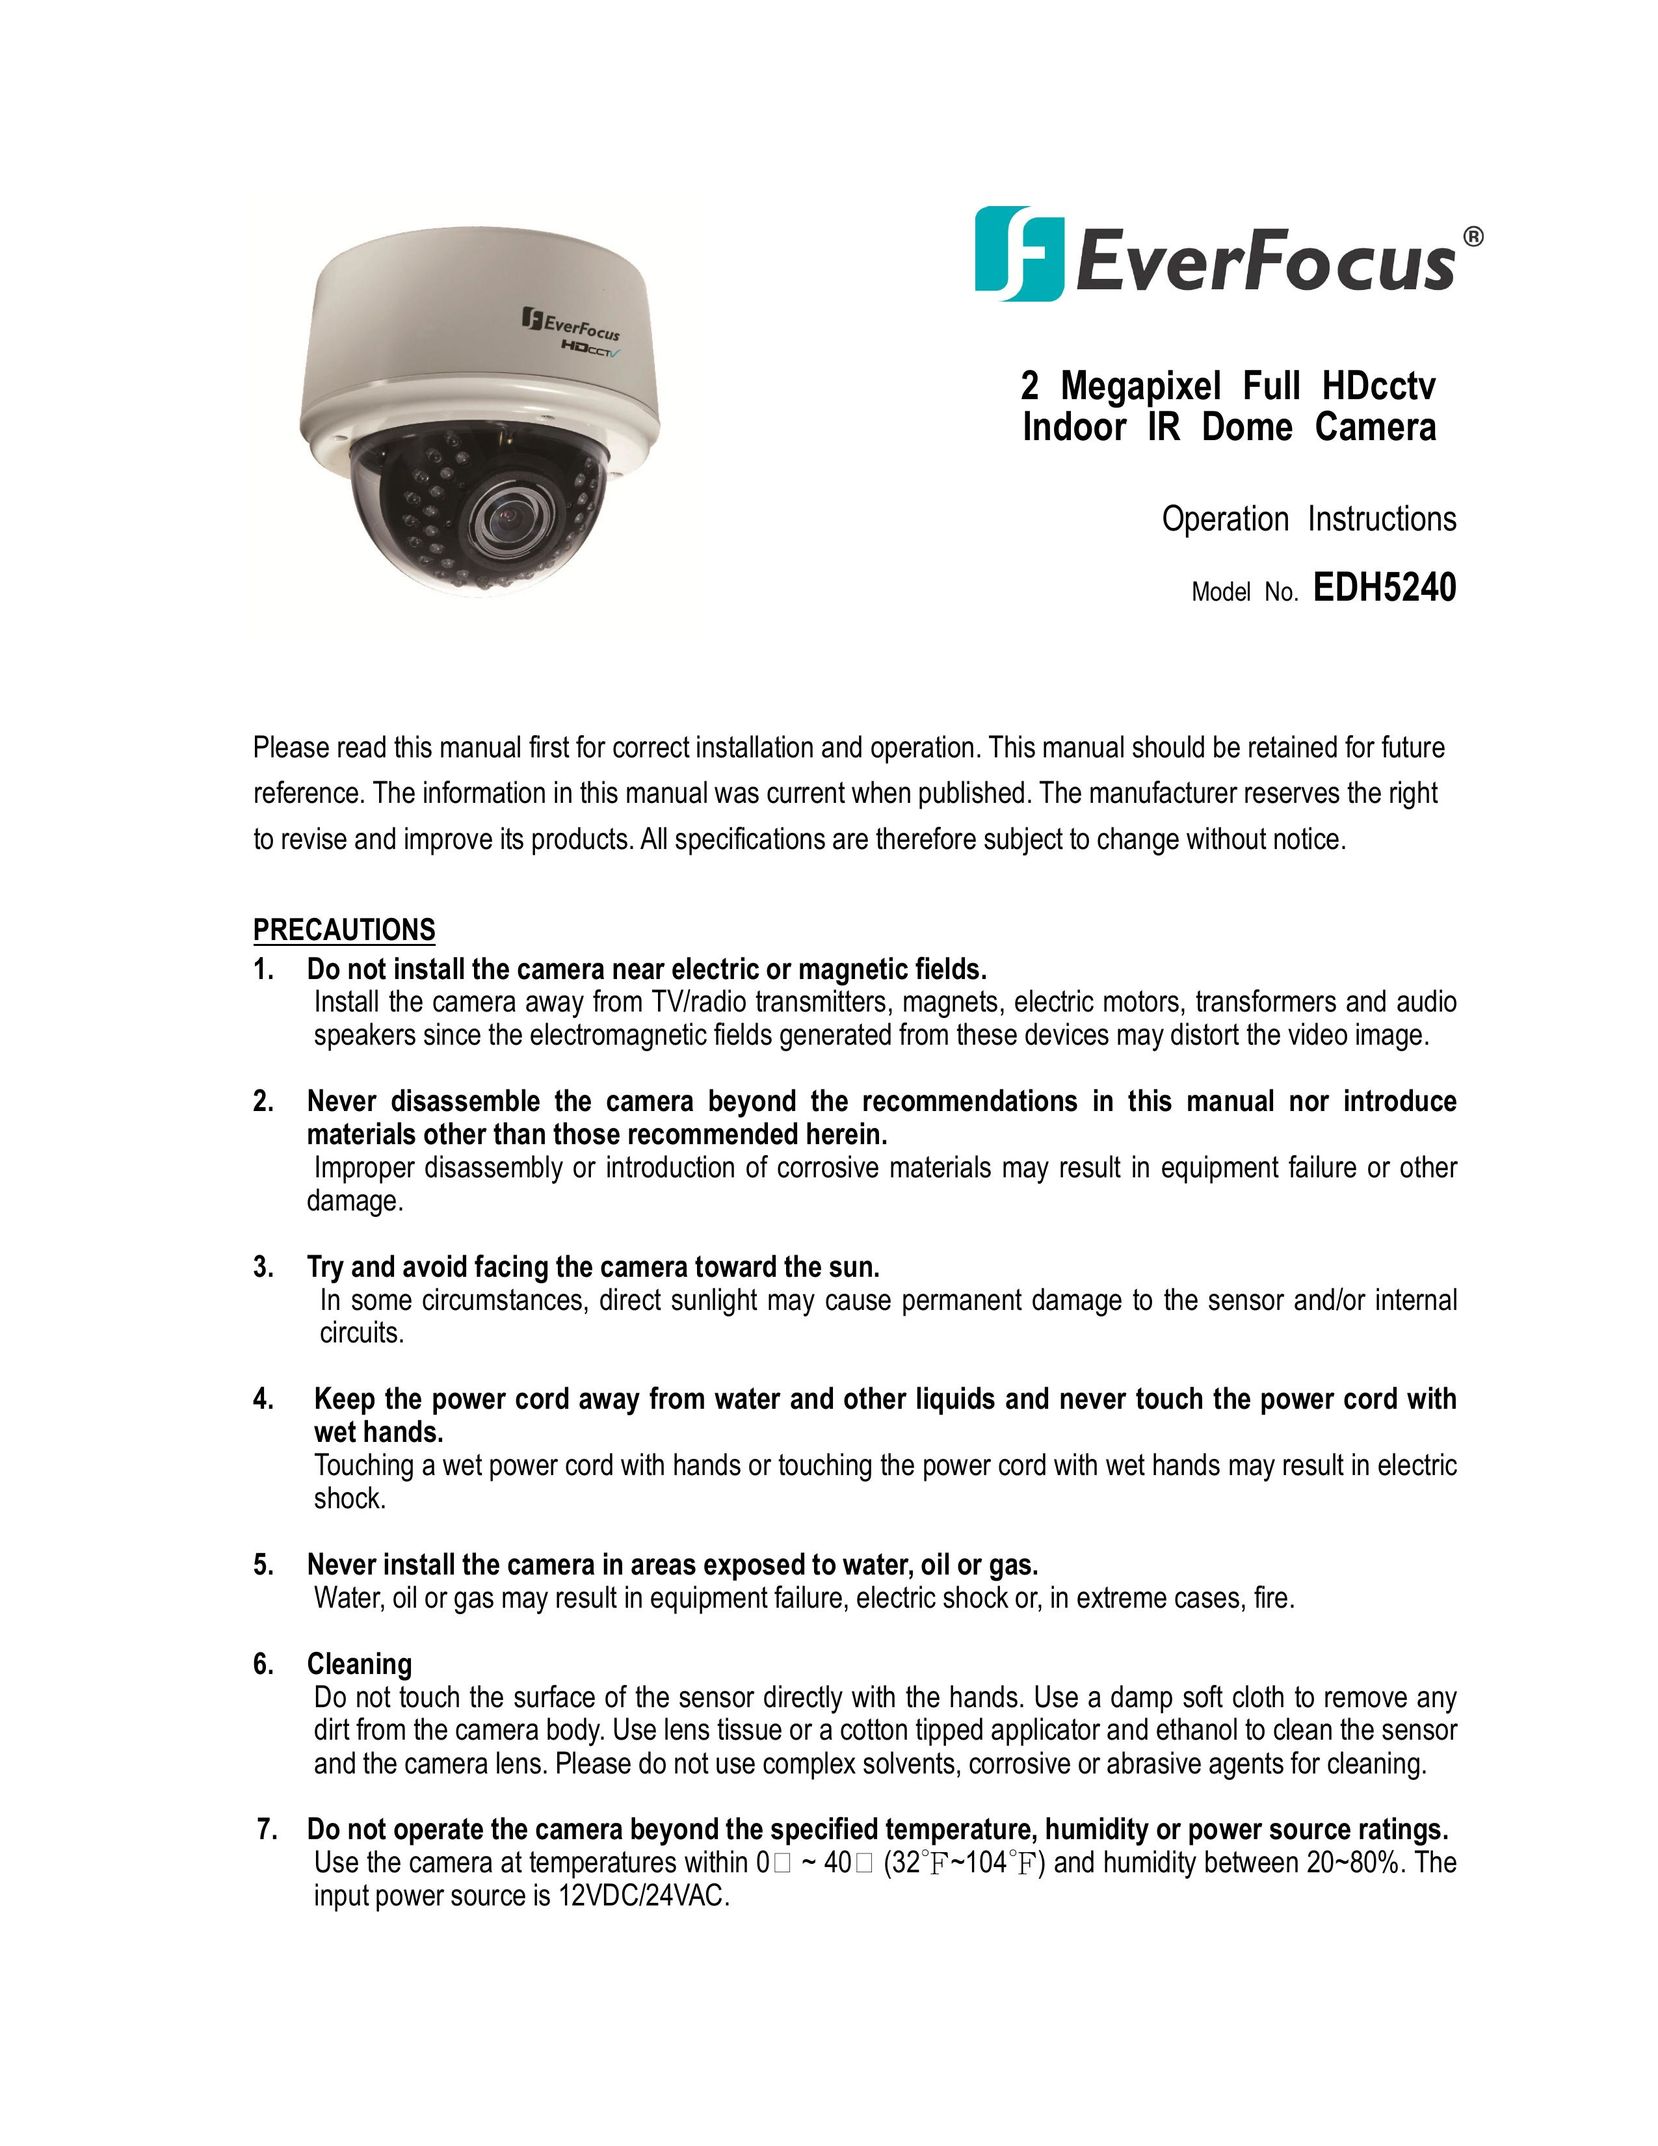 EverFocus EDH5240 Home Security System User Manual